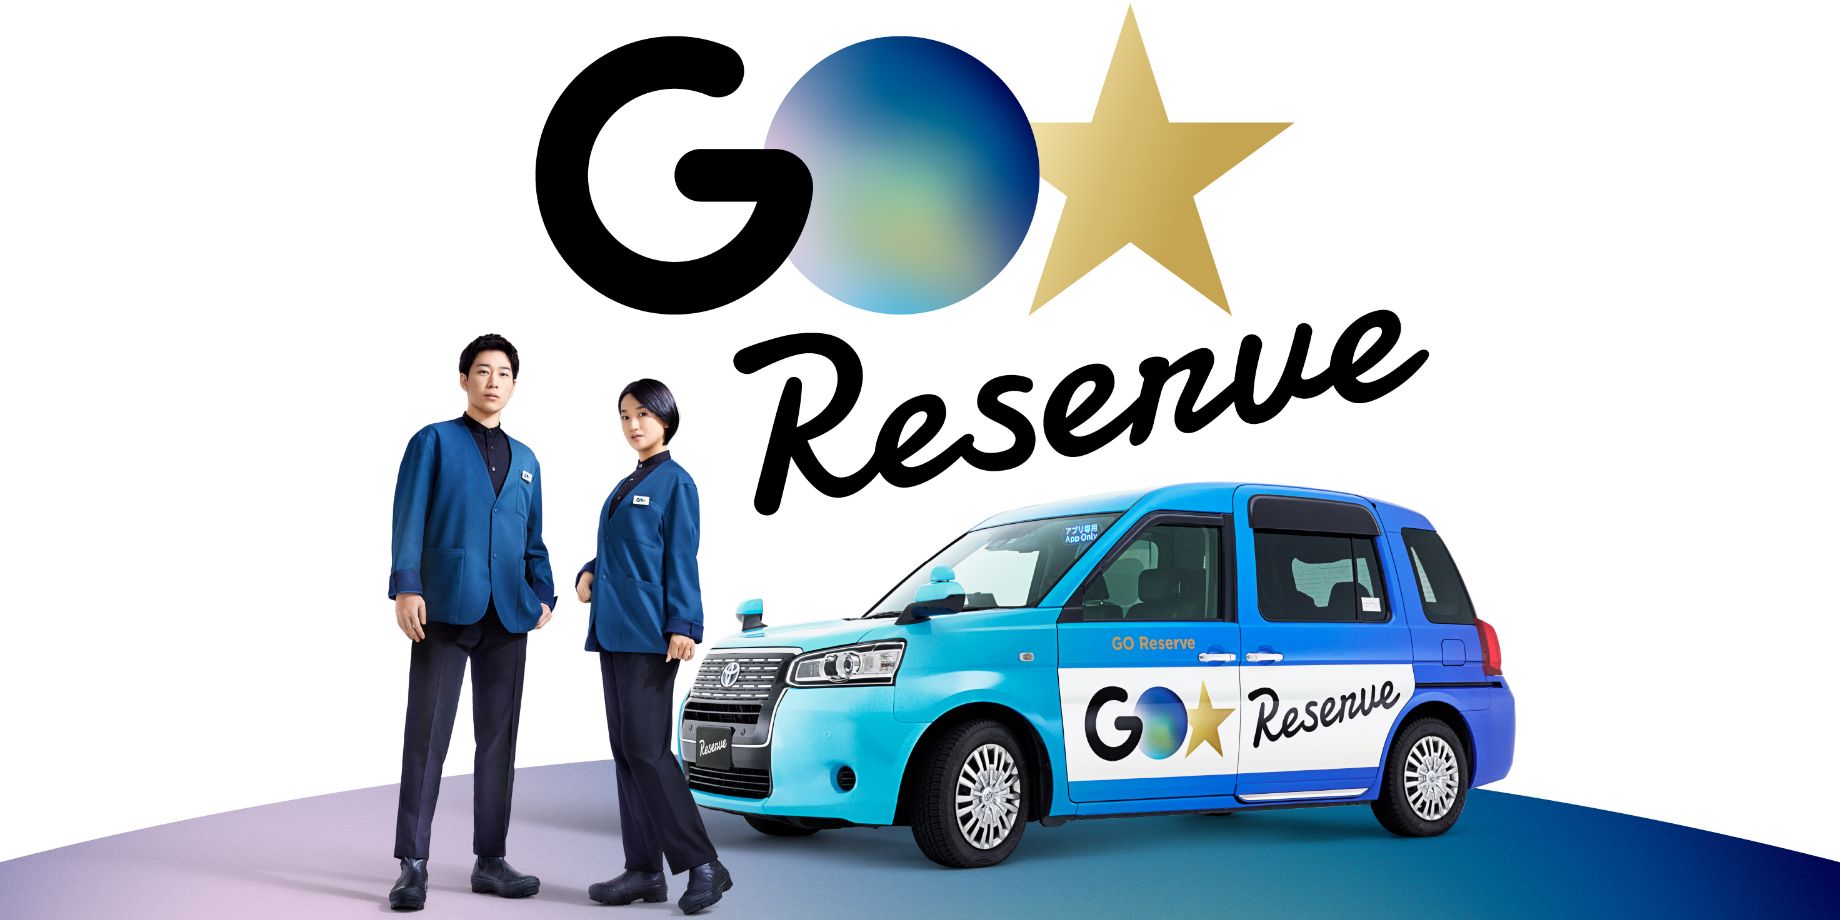 With its eye-catching bright-blue vehicle and crew members in blue jackets, GO Reserve has dramatically changed the image of the conventional taxi crew.